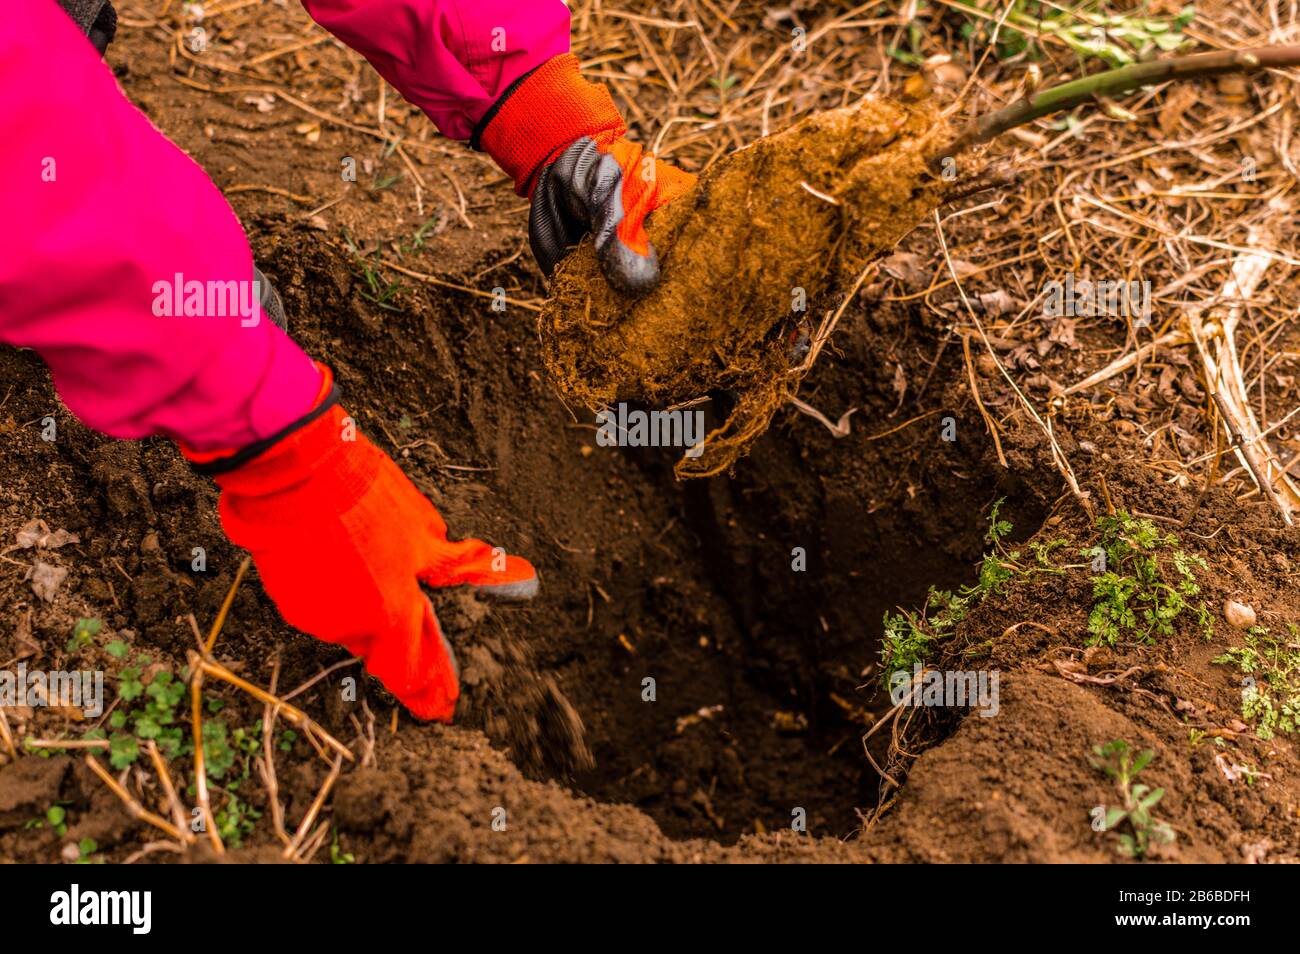 Young woman's hands planting  bilberry tree in the garden - stock photo Stock Photo